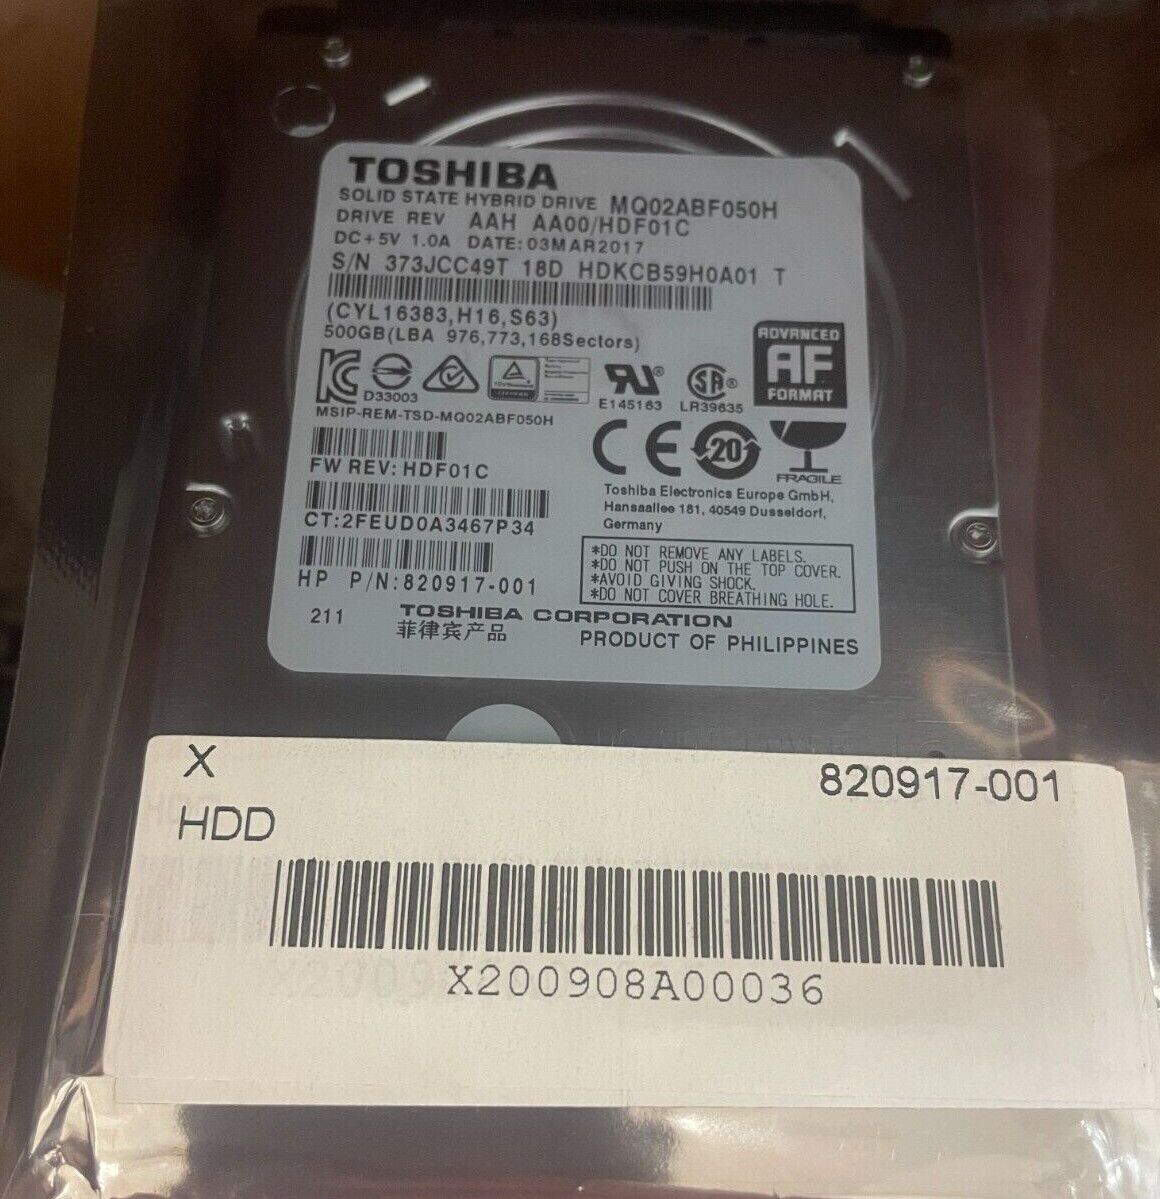 New Toshiba Solid State Hybrid Drive 820917-001 HDD 500GB 